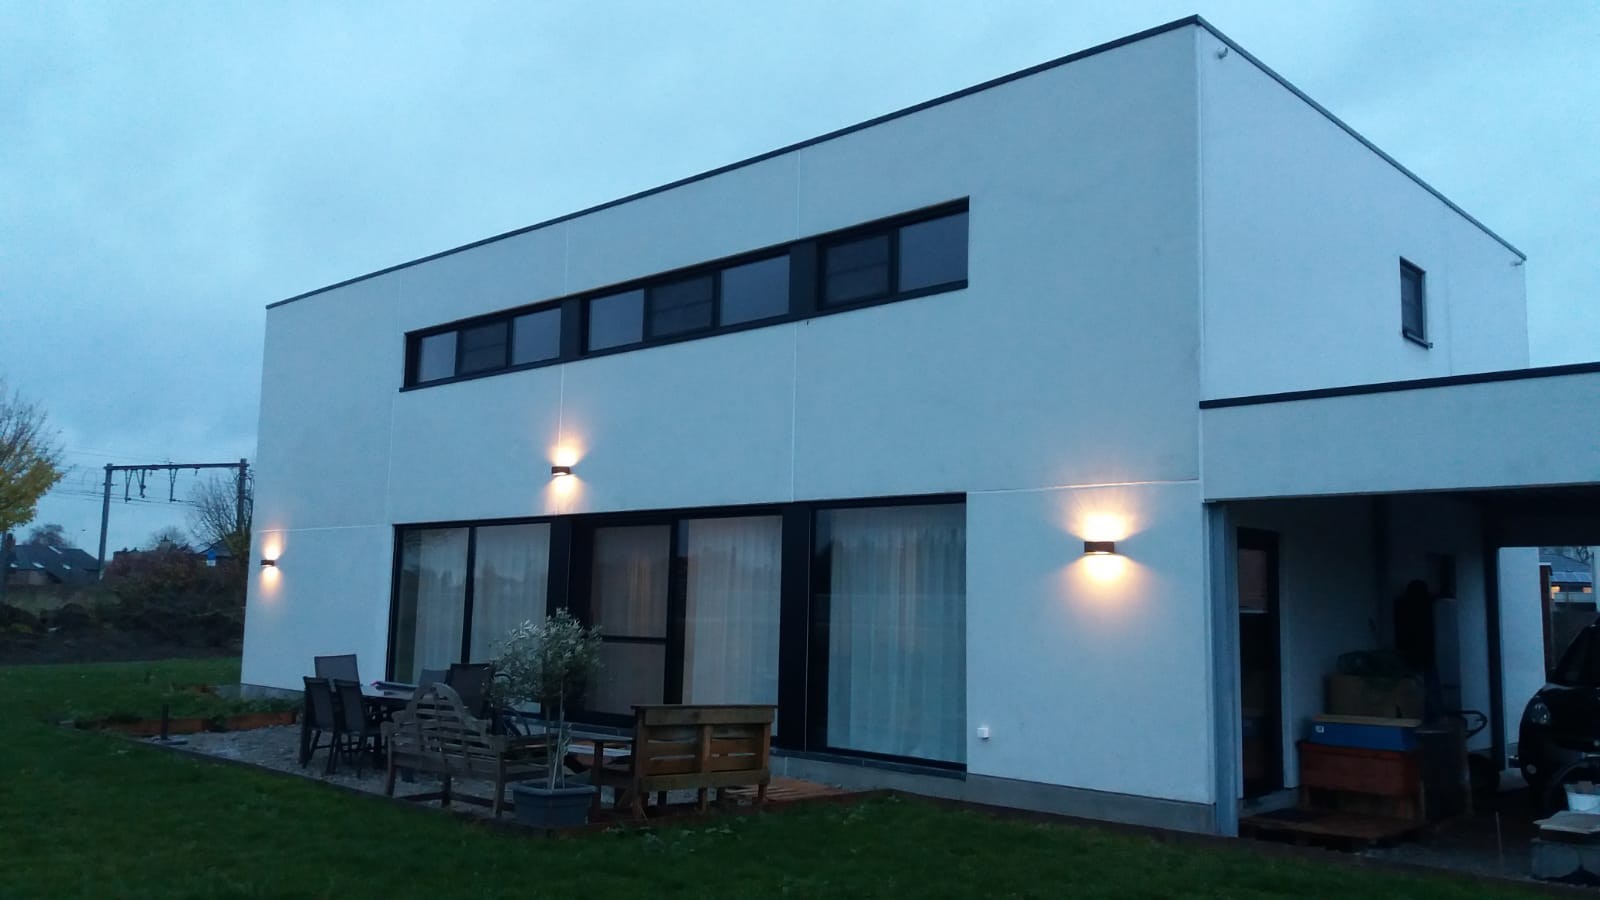 House with white concrete panels